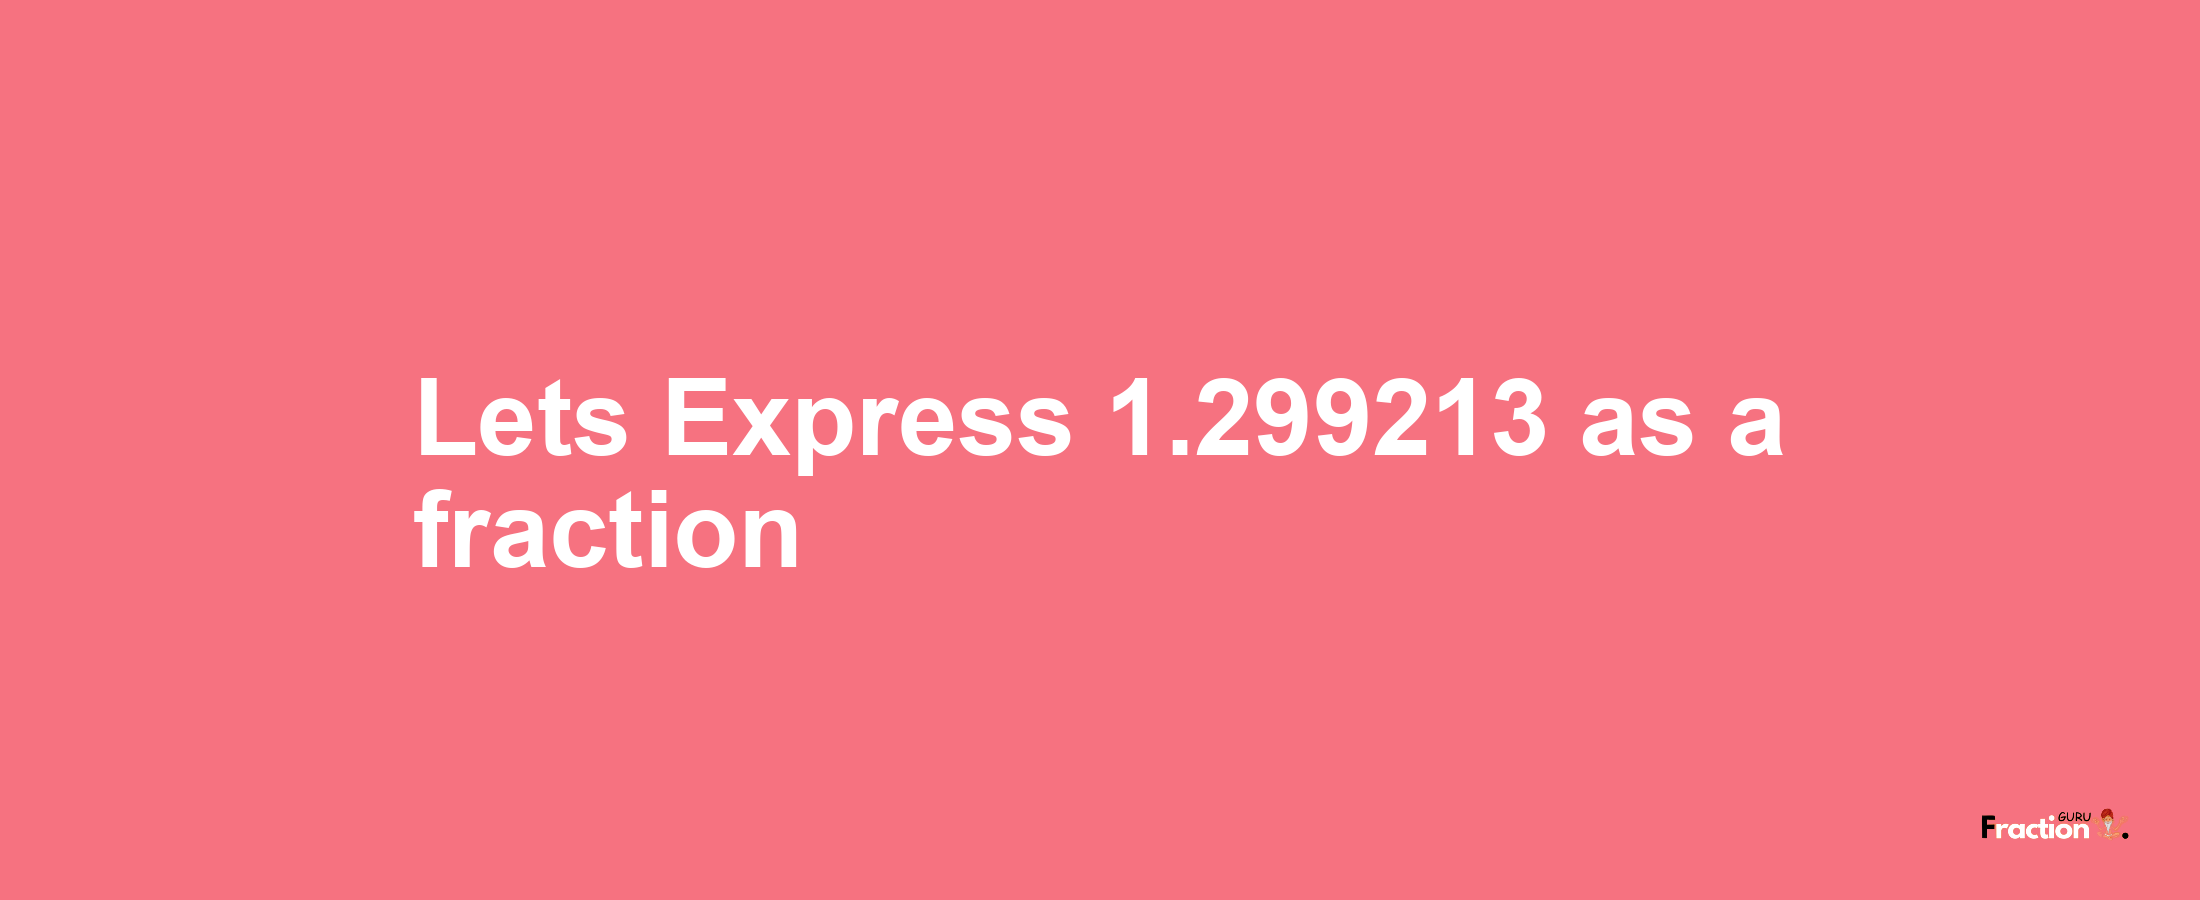 Lets Express 1.299213 as afraction